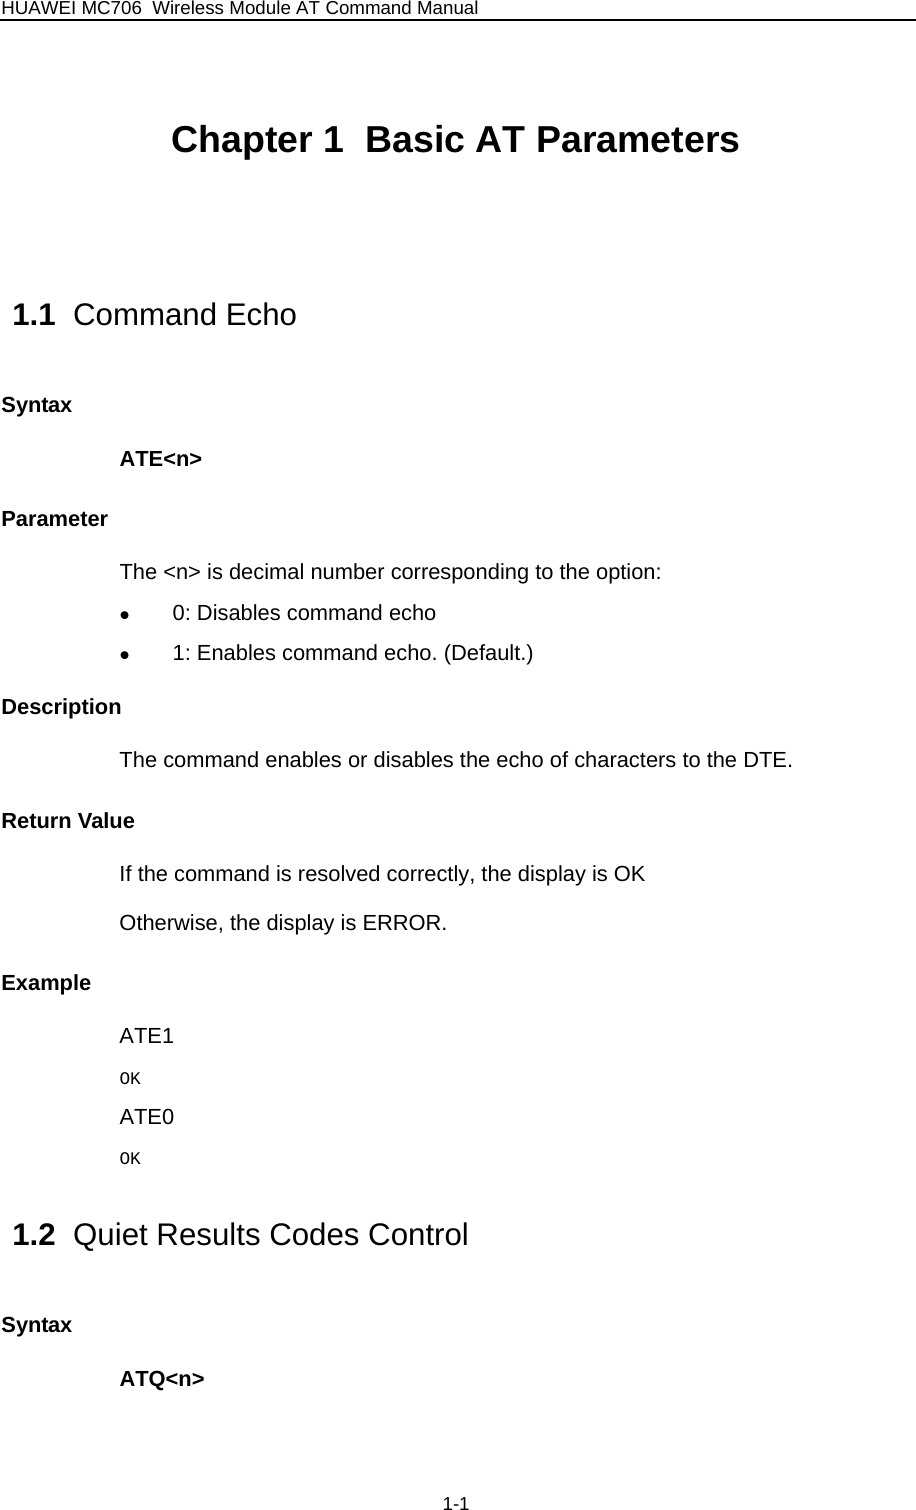 HUAWEI MC706 Wireless Module AT Command Manual Chapter 1  Basic AT Parameters  1.1  Command Echo Syntax ATE&lt;n&gt; Parameter The &lt;n&gt; is decimal number corresponding to the option:   z 0: Disables command echo z 1: Enables command echo. (Default.) Description The command enables or disables the echo of characters to the DTE. Return Value If the command is resolved correctly, the display is OK Otherwise, the display is ERROR. Example ATE1 OK ATE0 OK 1.2  Quiet Results Codes Control Syntax ATQ&lt;n&gt; 1-1 